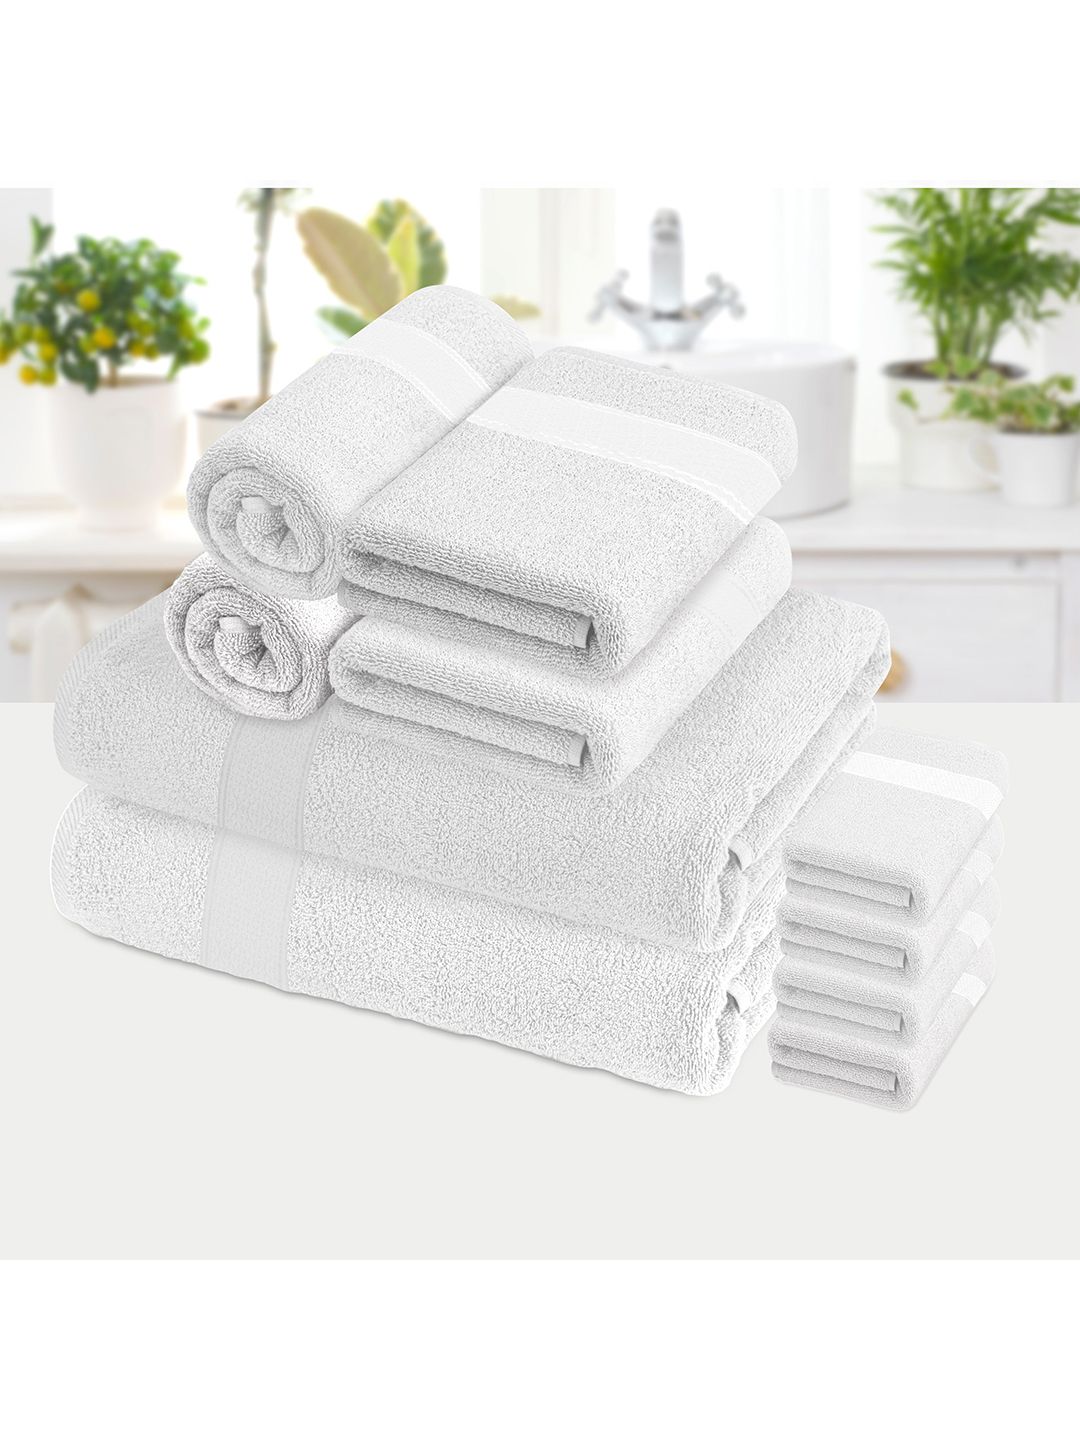 Athome by Nilkamal White Set of 10 Solid 370 GSM Cotton Towel Set Price in India